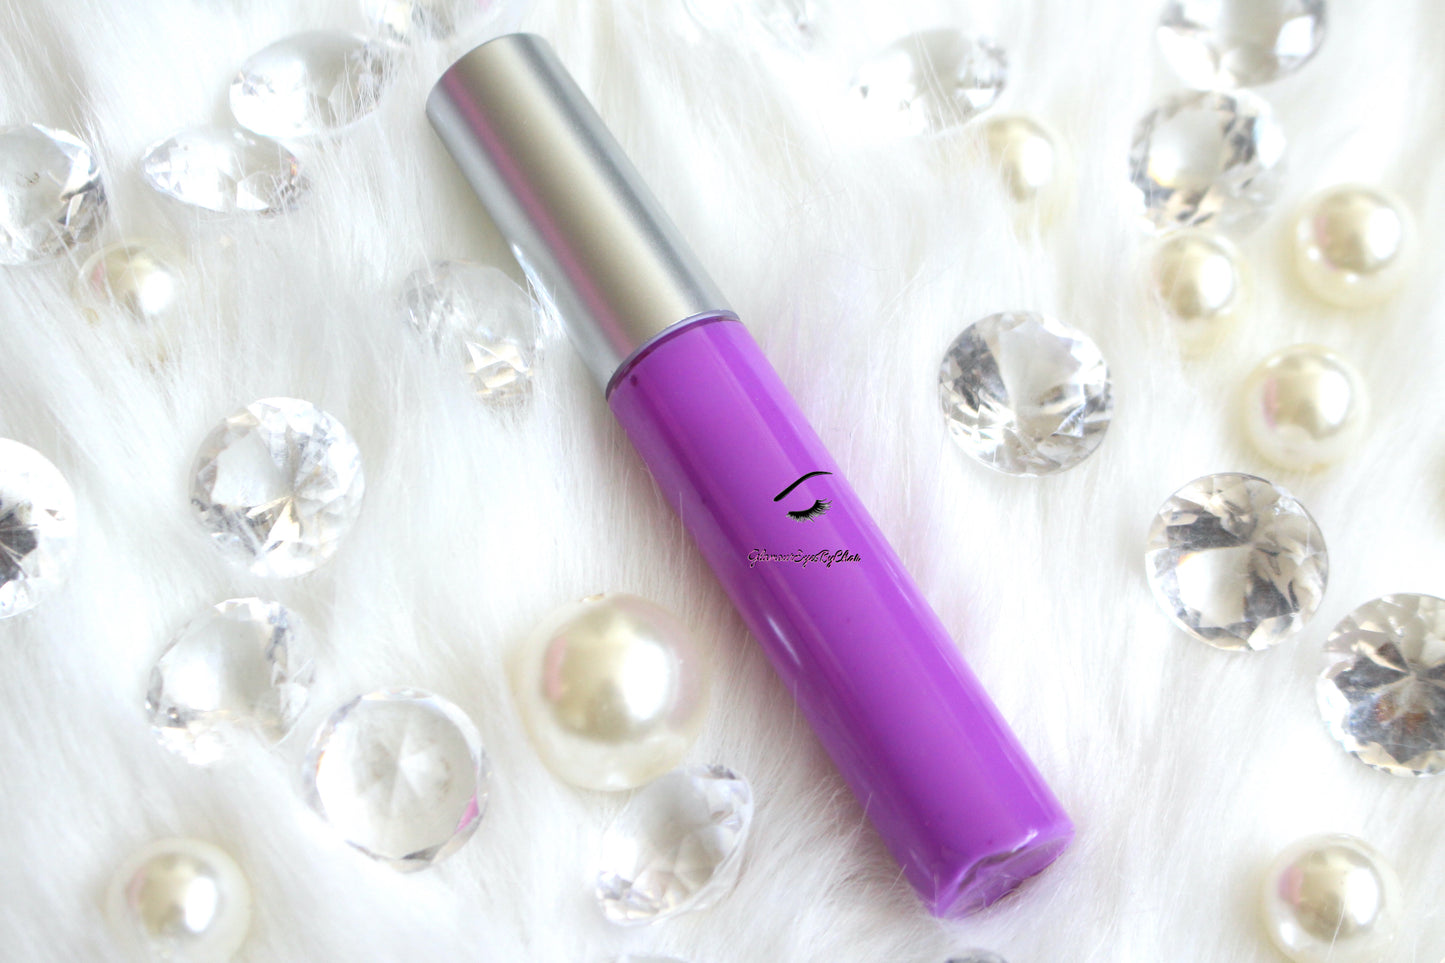 Empress is a gorgeous lavender hydrating gloss. This gloss is also vegan, gluten-free, high shine, smooth and long lasting. It's made with premium rich ingredients to keep your lips soft, moisturized and luscious without feeling sticky. Empress is available in a squeeze tube and a wand tube (doe foot applicator) for a more precise application.